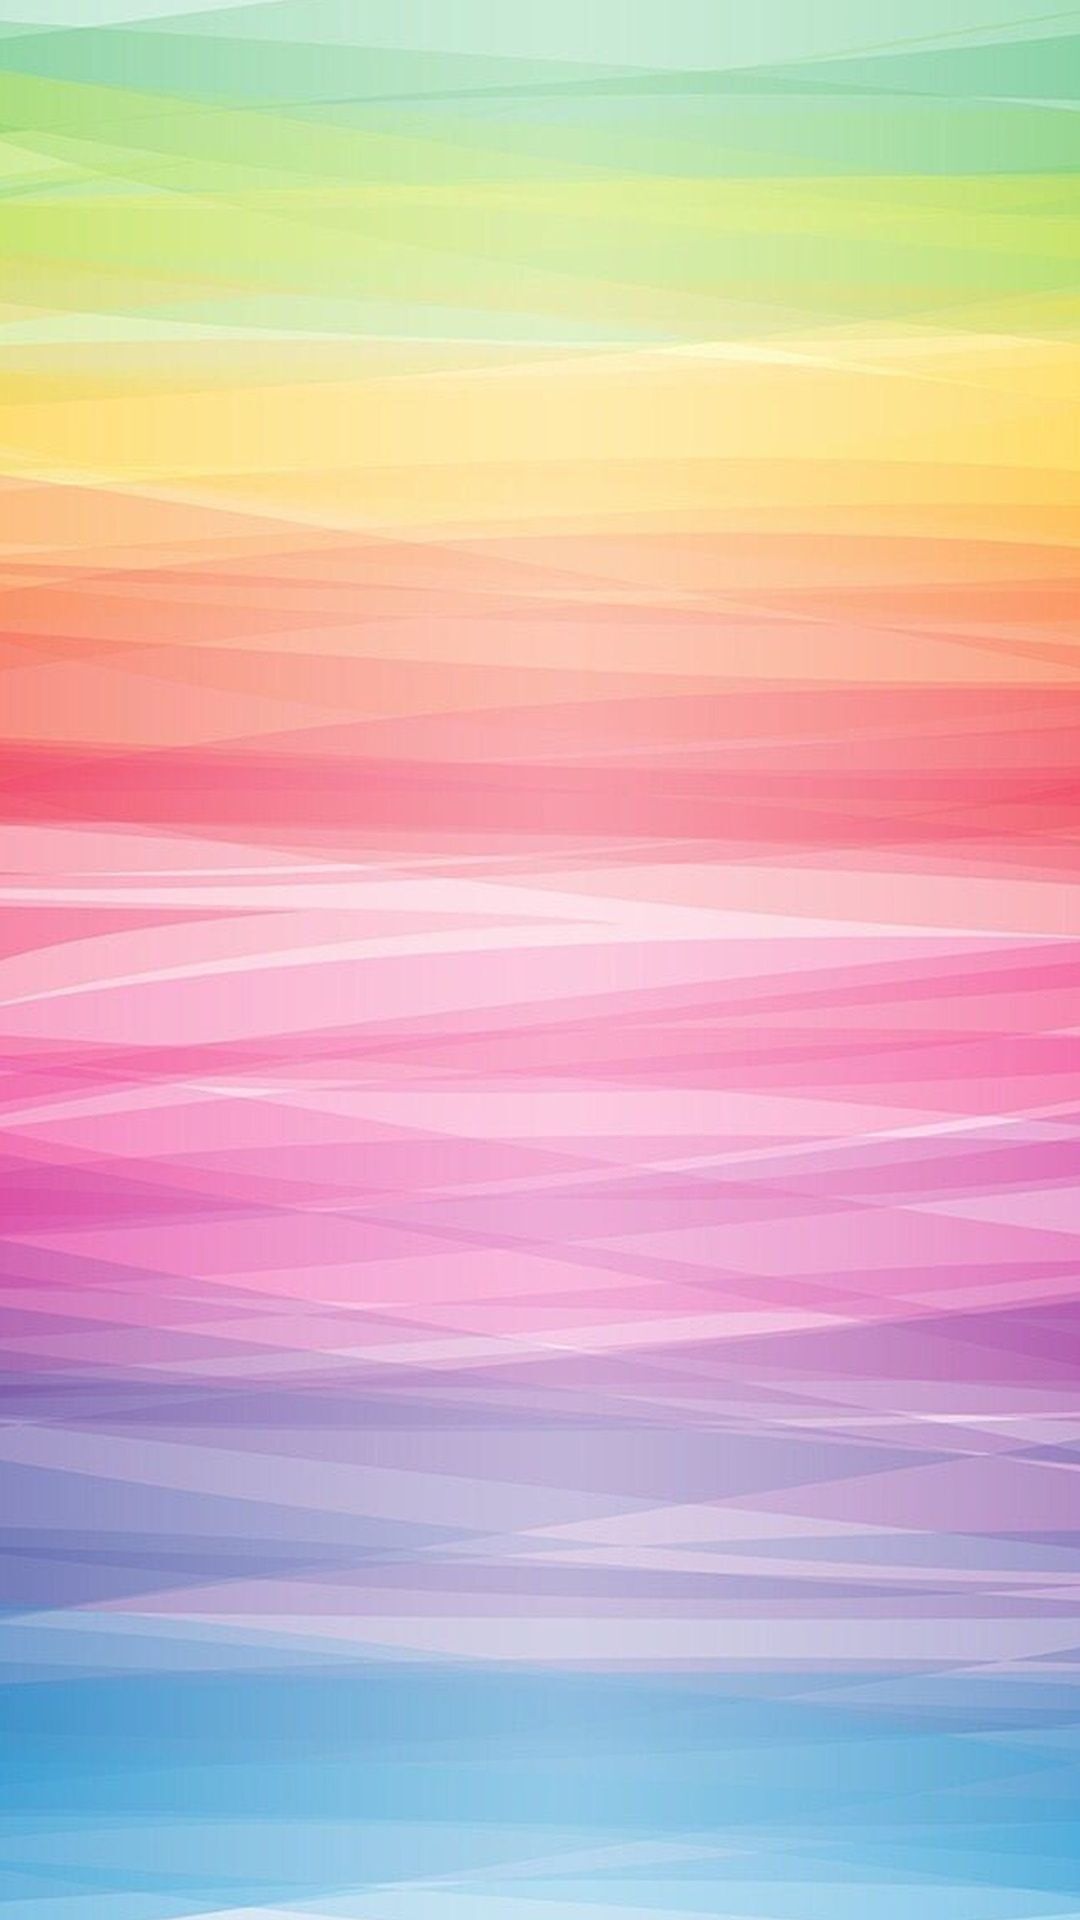 IPhone wallpaper rainbow abstract with high-resolution 1080x1920 pixel. You can use this wallpaper for your iPhone 5, 6, 7, 8, X, XS, XR backgrounds, Mobile Screensaver, or iPad Lock Screen - Pastel